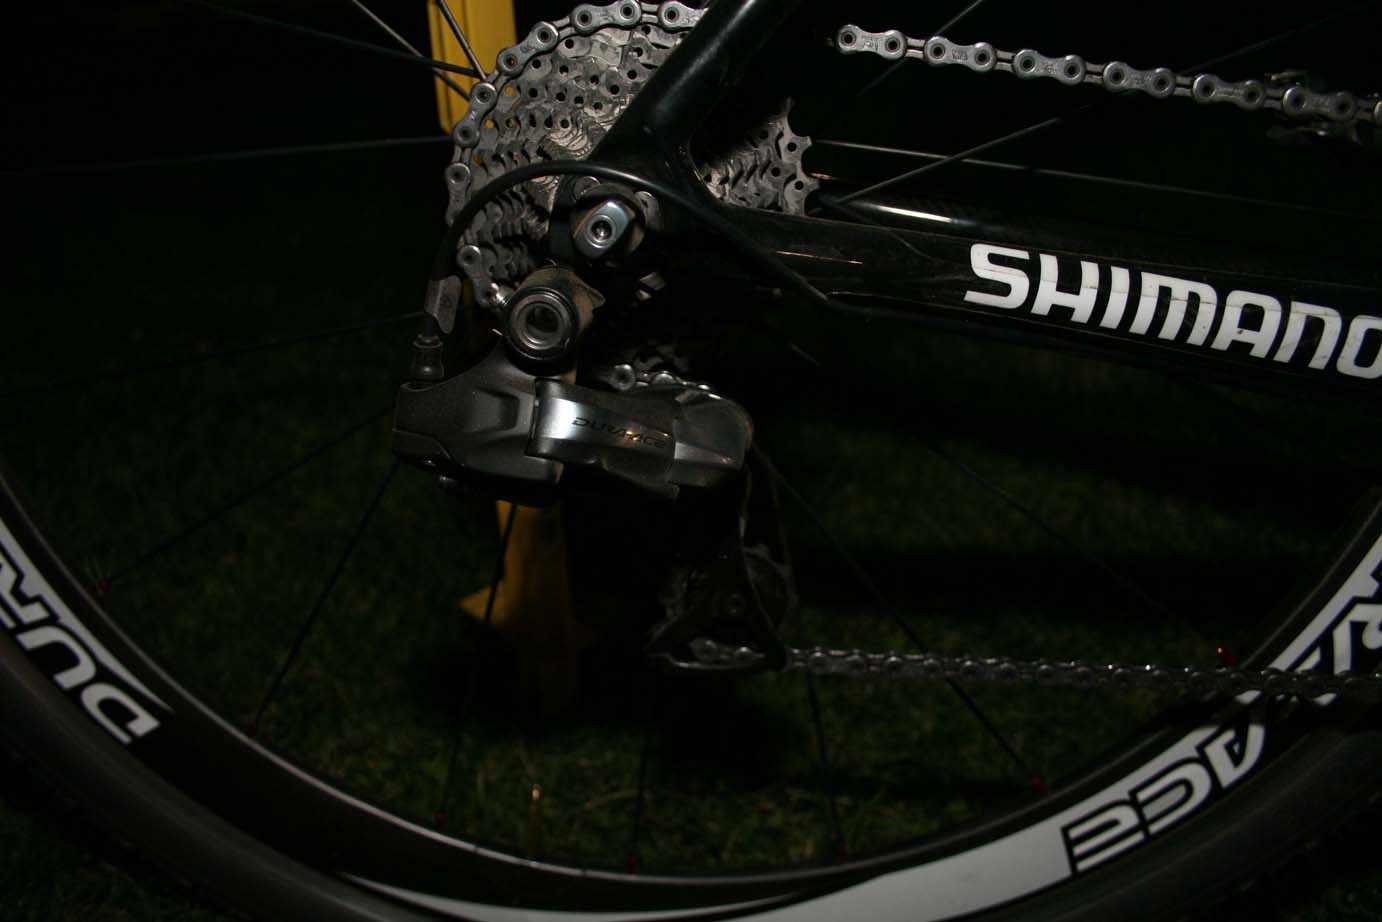 Craig was outfitted with electric Shimano Di2 internals for the evening. by Andrew Yee